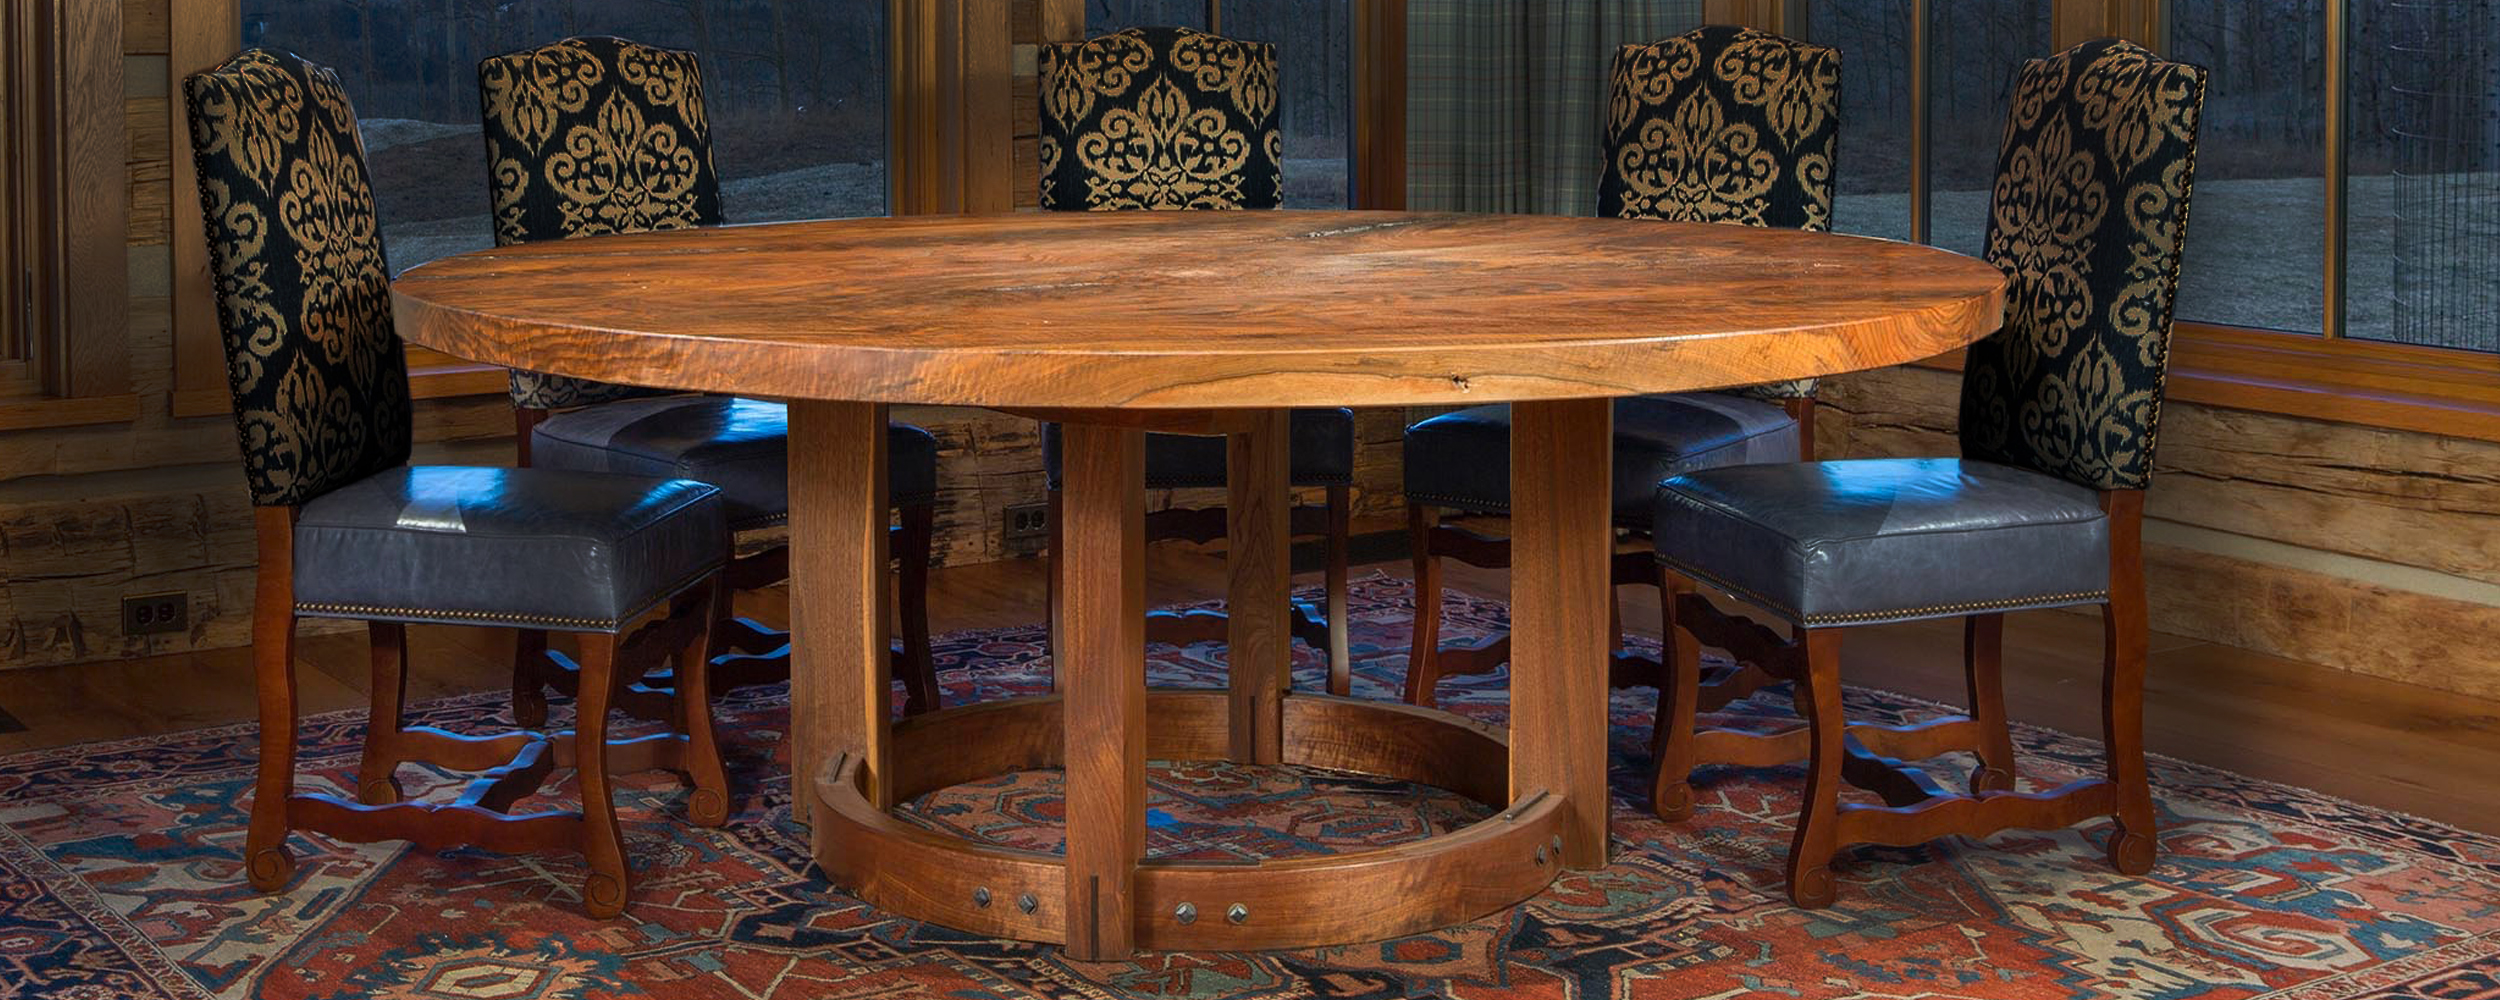 round table for home 2500x1000.jpg